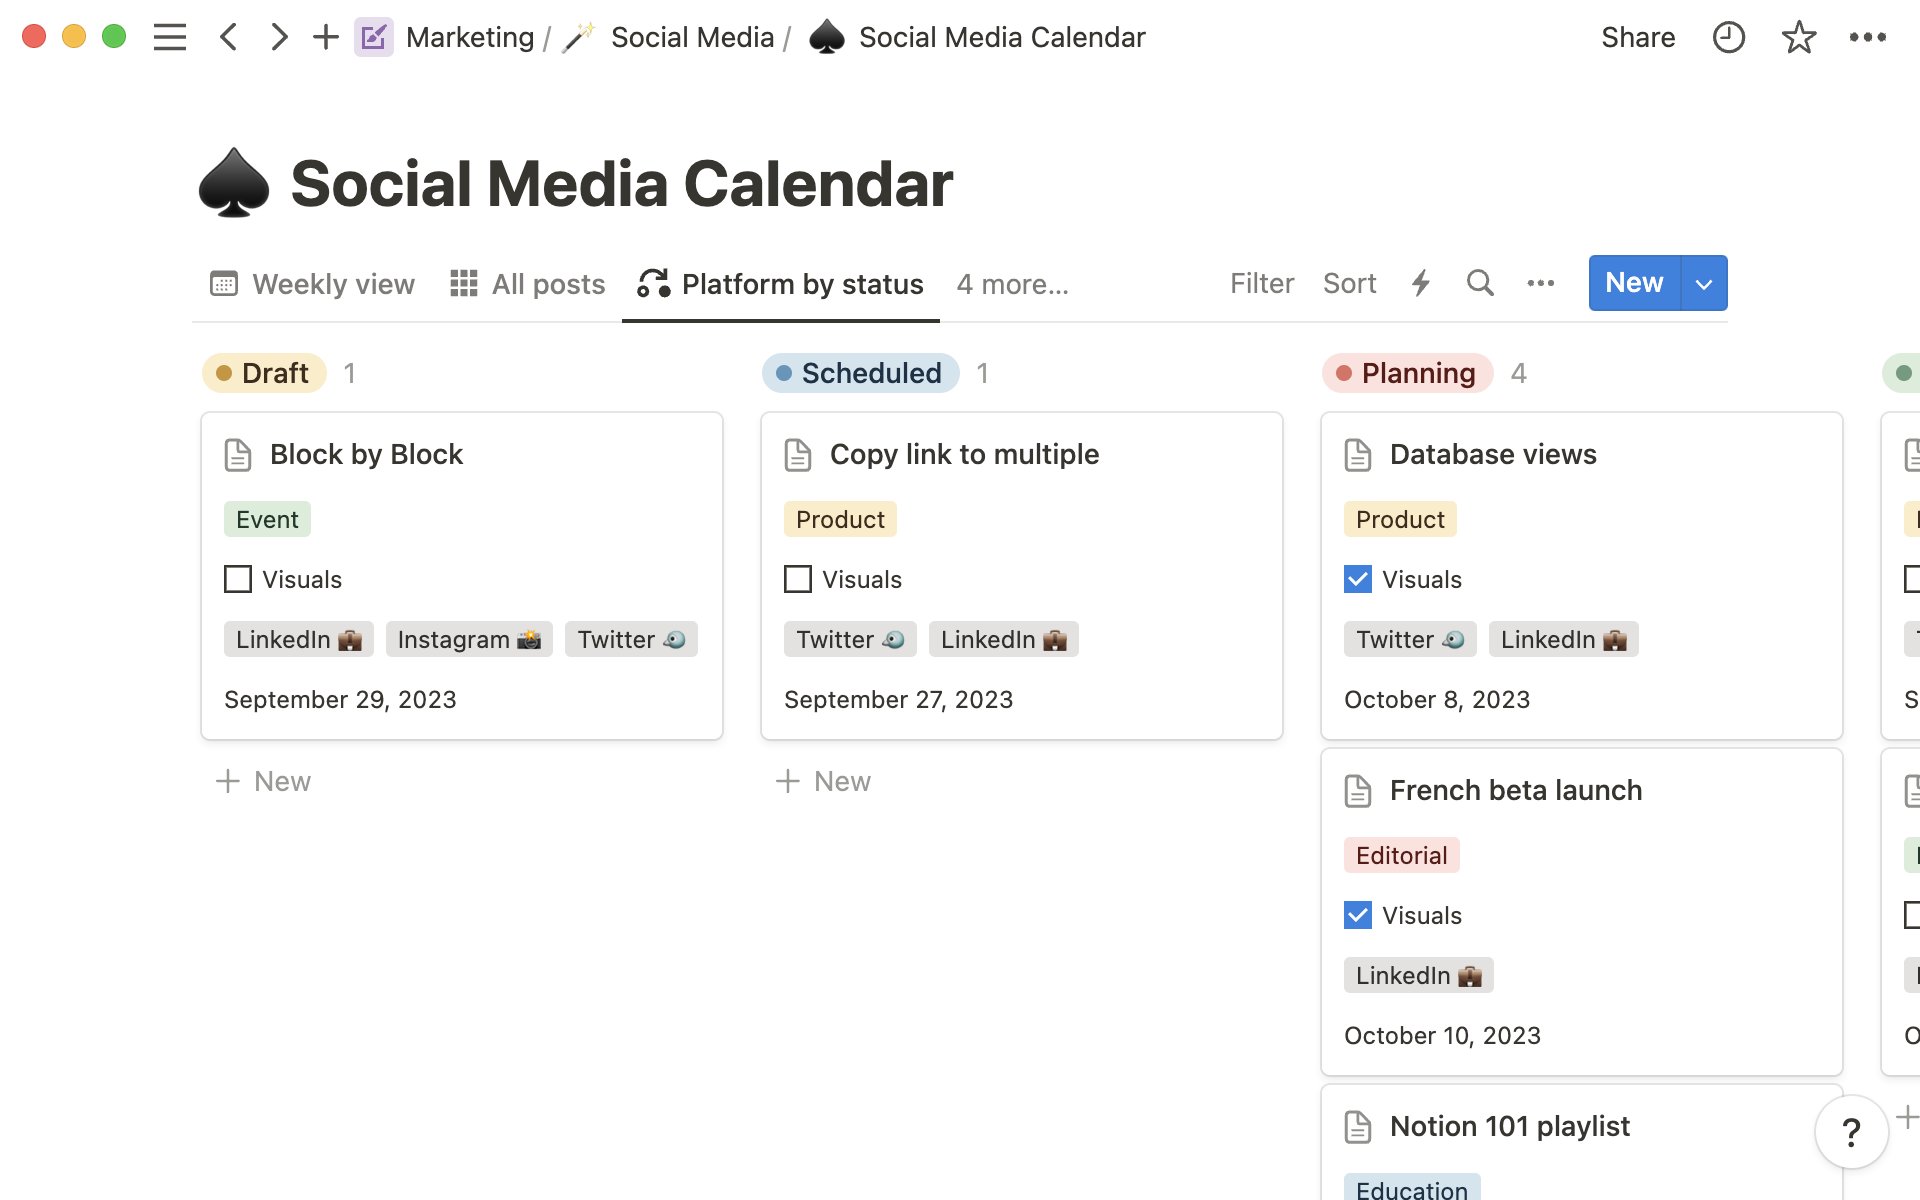 A view of the Social Media calendar showing the status and platform of each upcoming post.